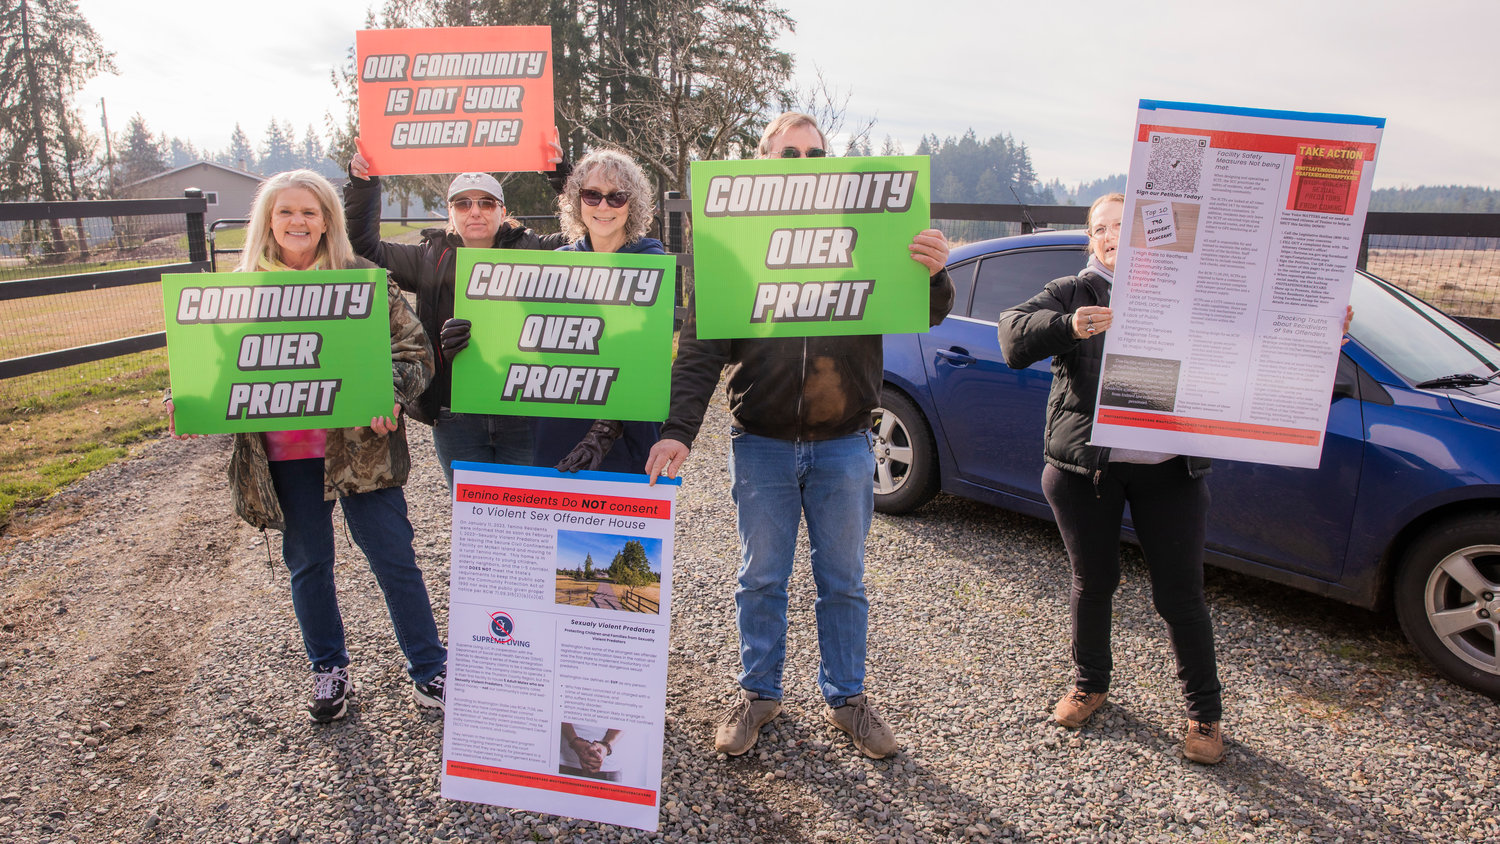 From left, Kathy Taylor, Suzanne Brown, Rachelle Reinitz, a neighbor who brought extra signs and wished to stay anonymous, and Kim Crist who lives across the street, gather for a demonstration outside the Supreme Living facility located at 2813 140th Avenue Southwest in Tenino on Wednesday.